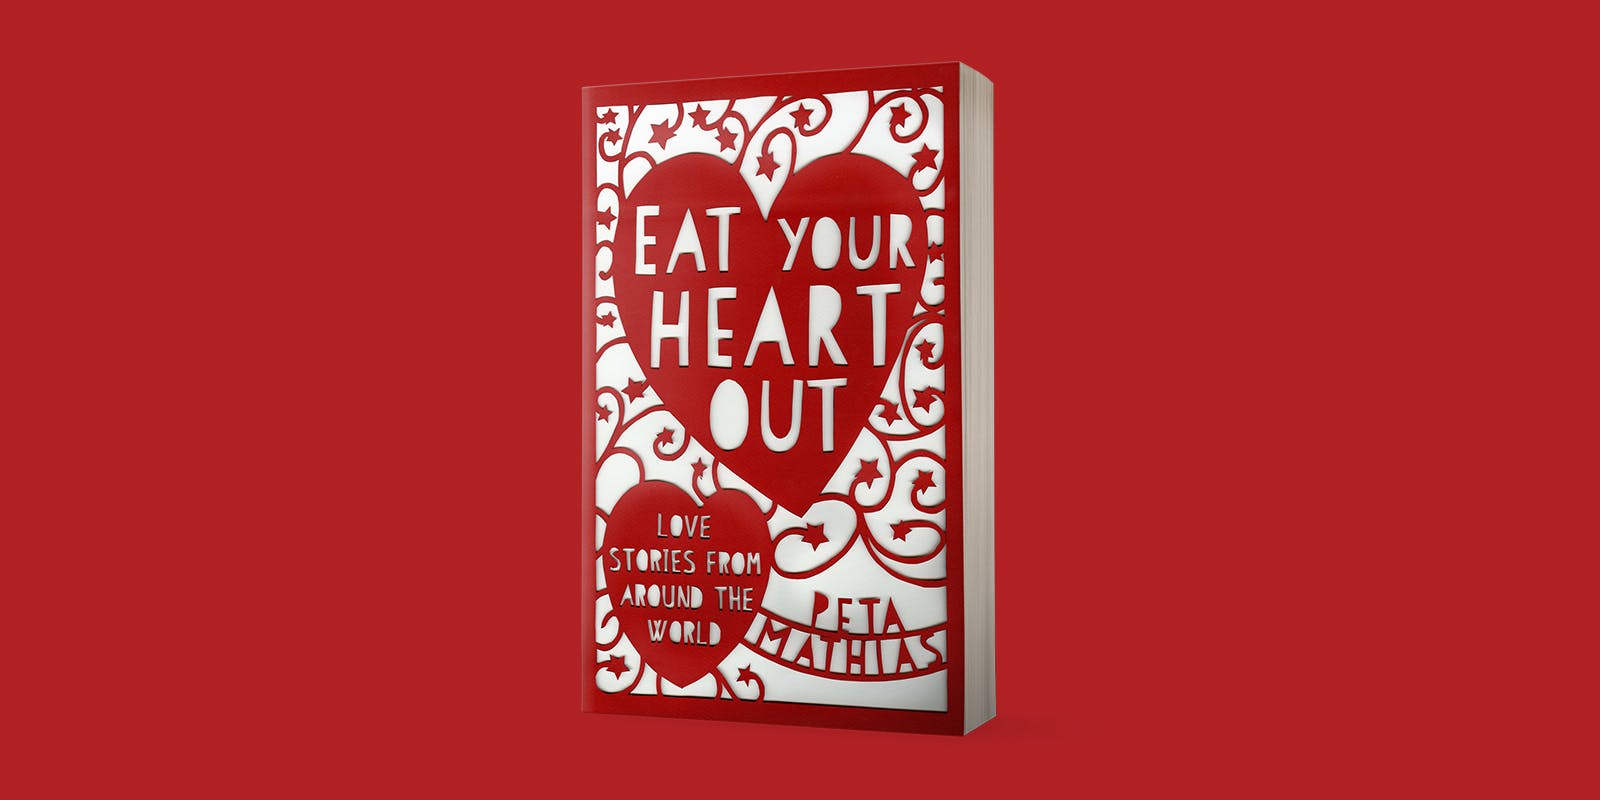 Recipe for winning the heart of your true love according to Eat Your Heart Out by Peta Mathias